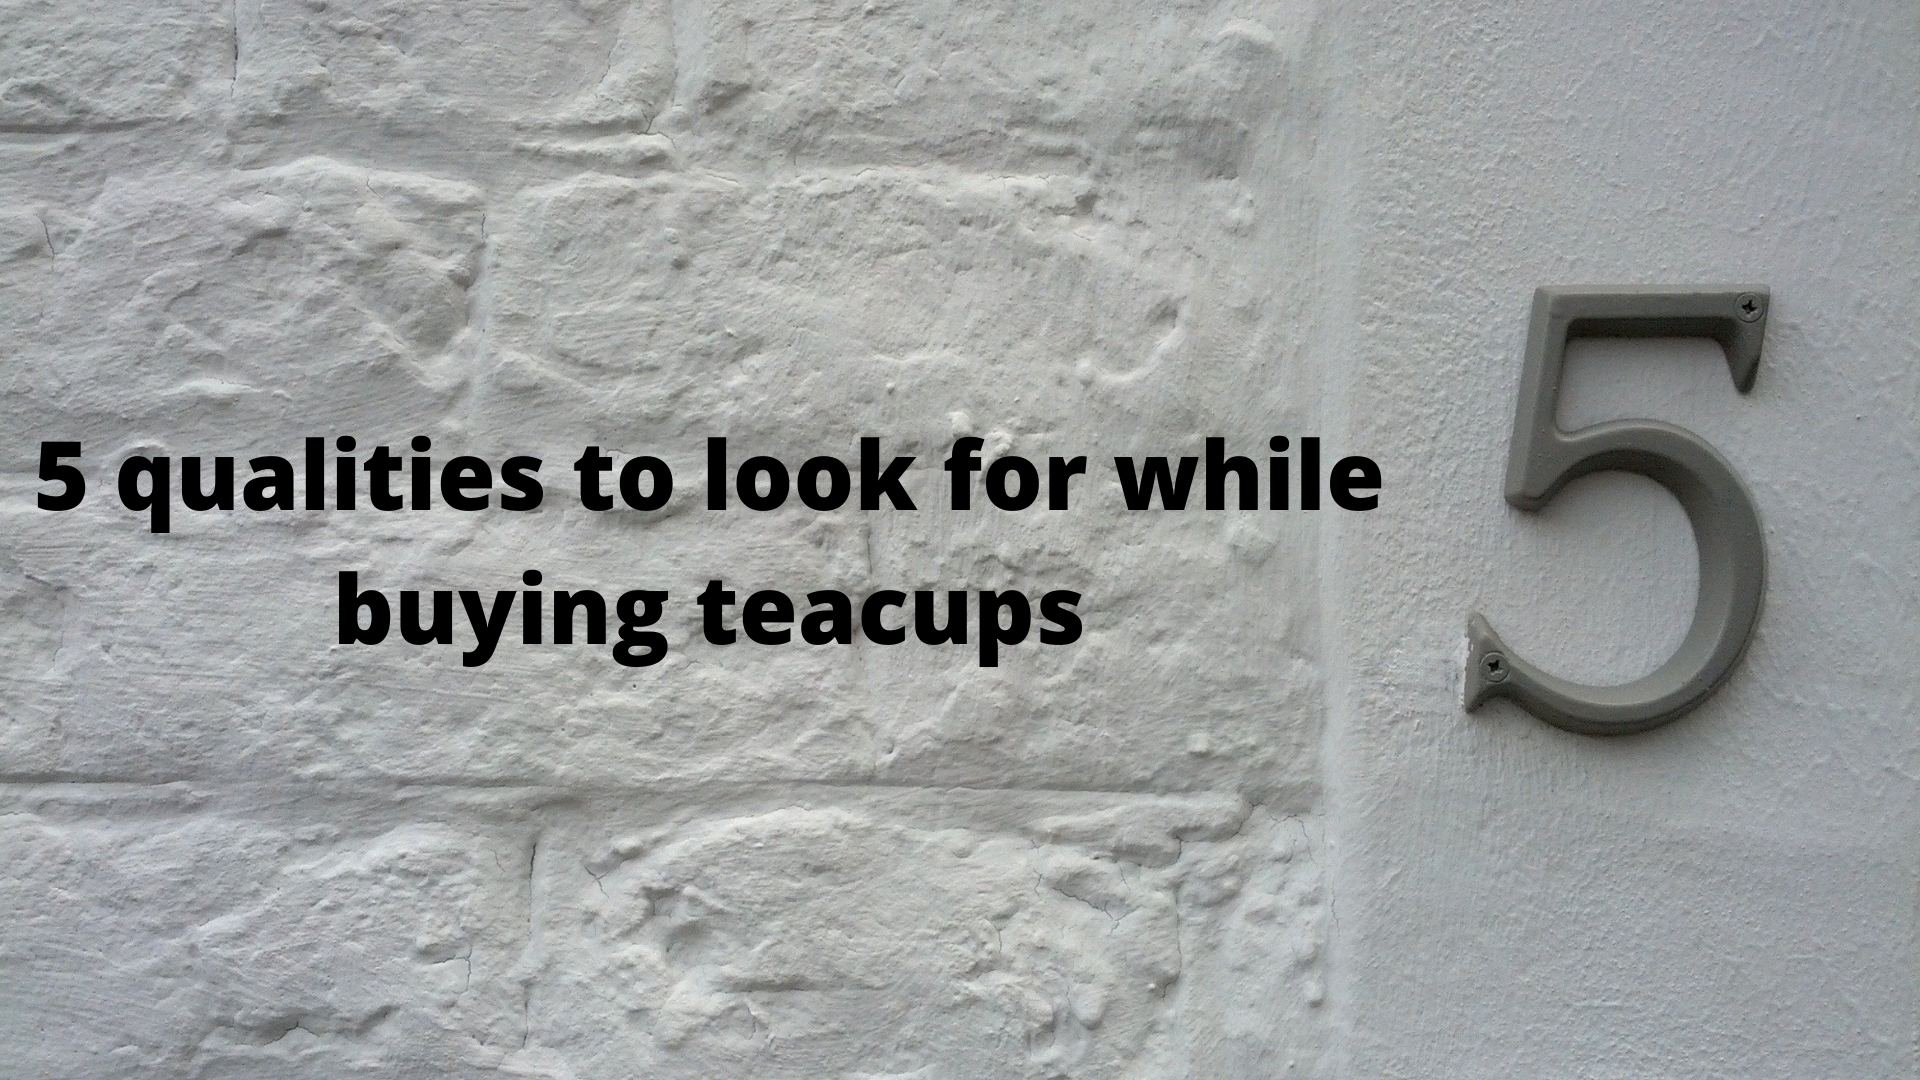 5 qualities to look for while buying tea cups